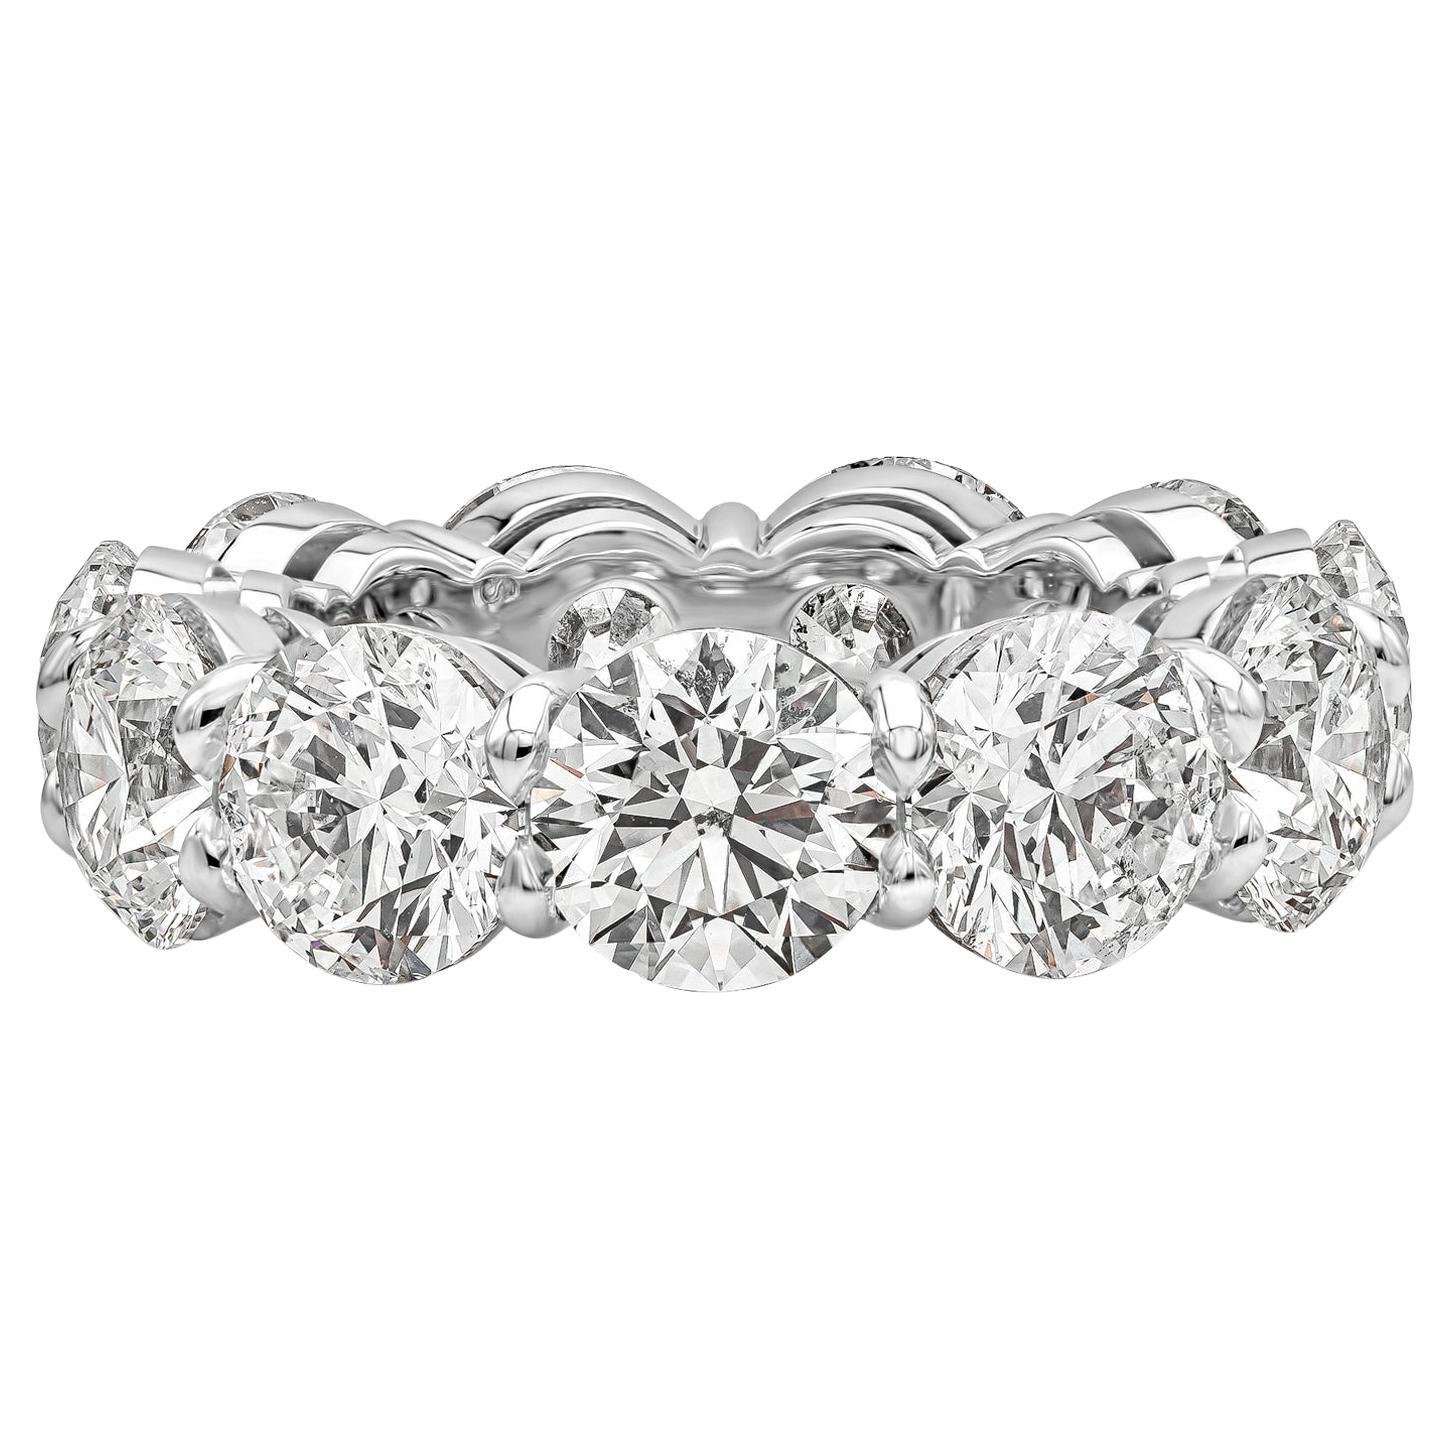 GIA Certified 11.10 Carats Total Round Diamond Eternity Wedding Band Ring